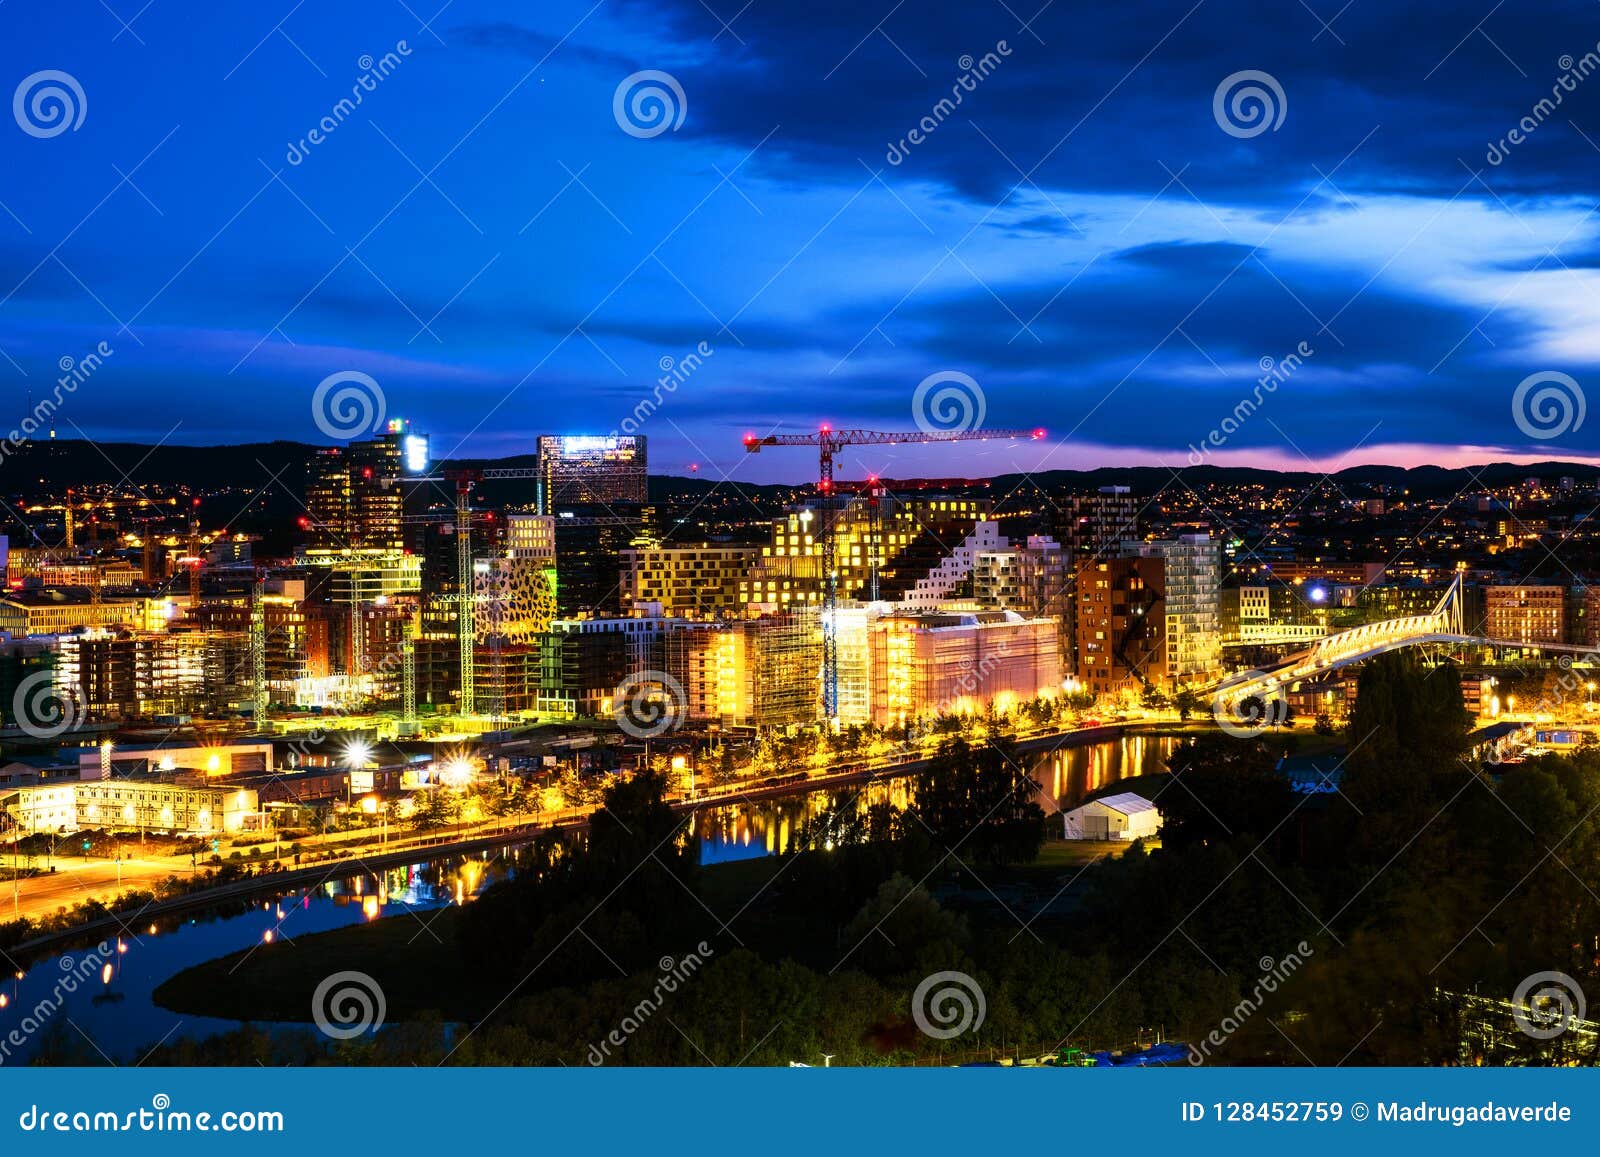 a night view of sentrum area of oslo, norway, with barcode buildings